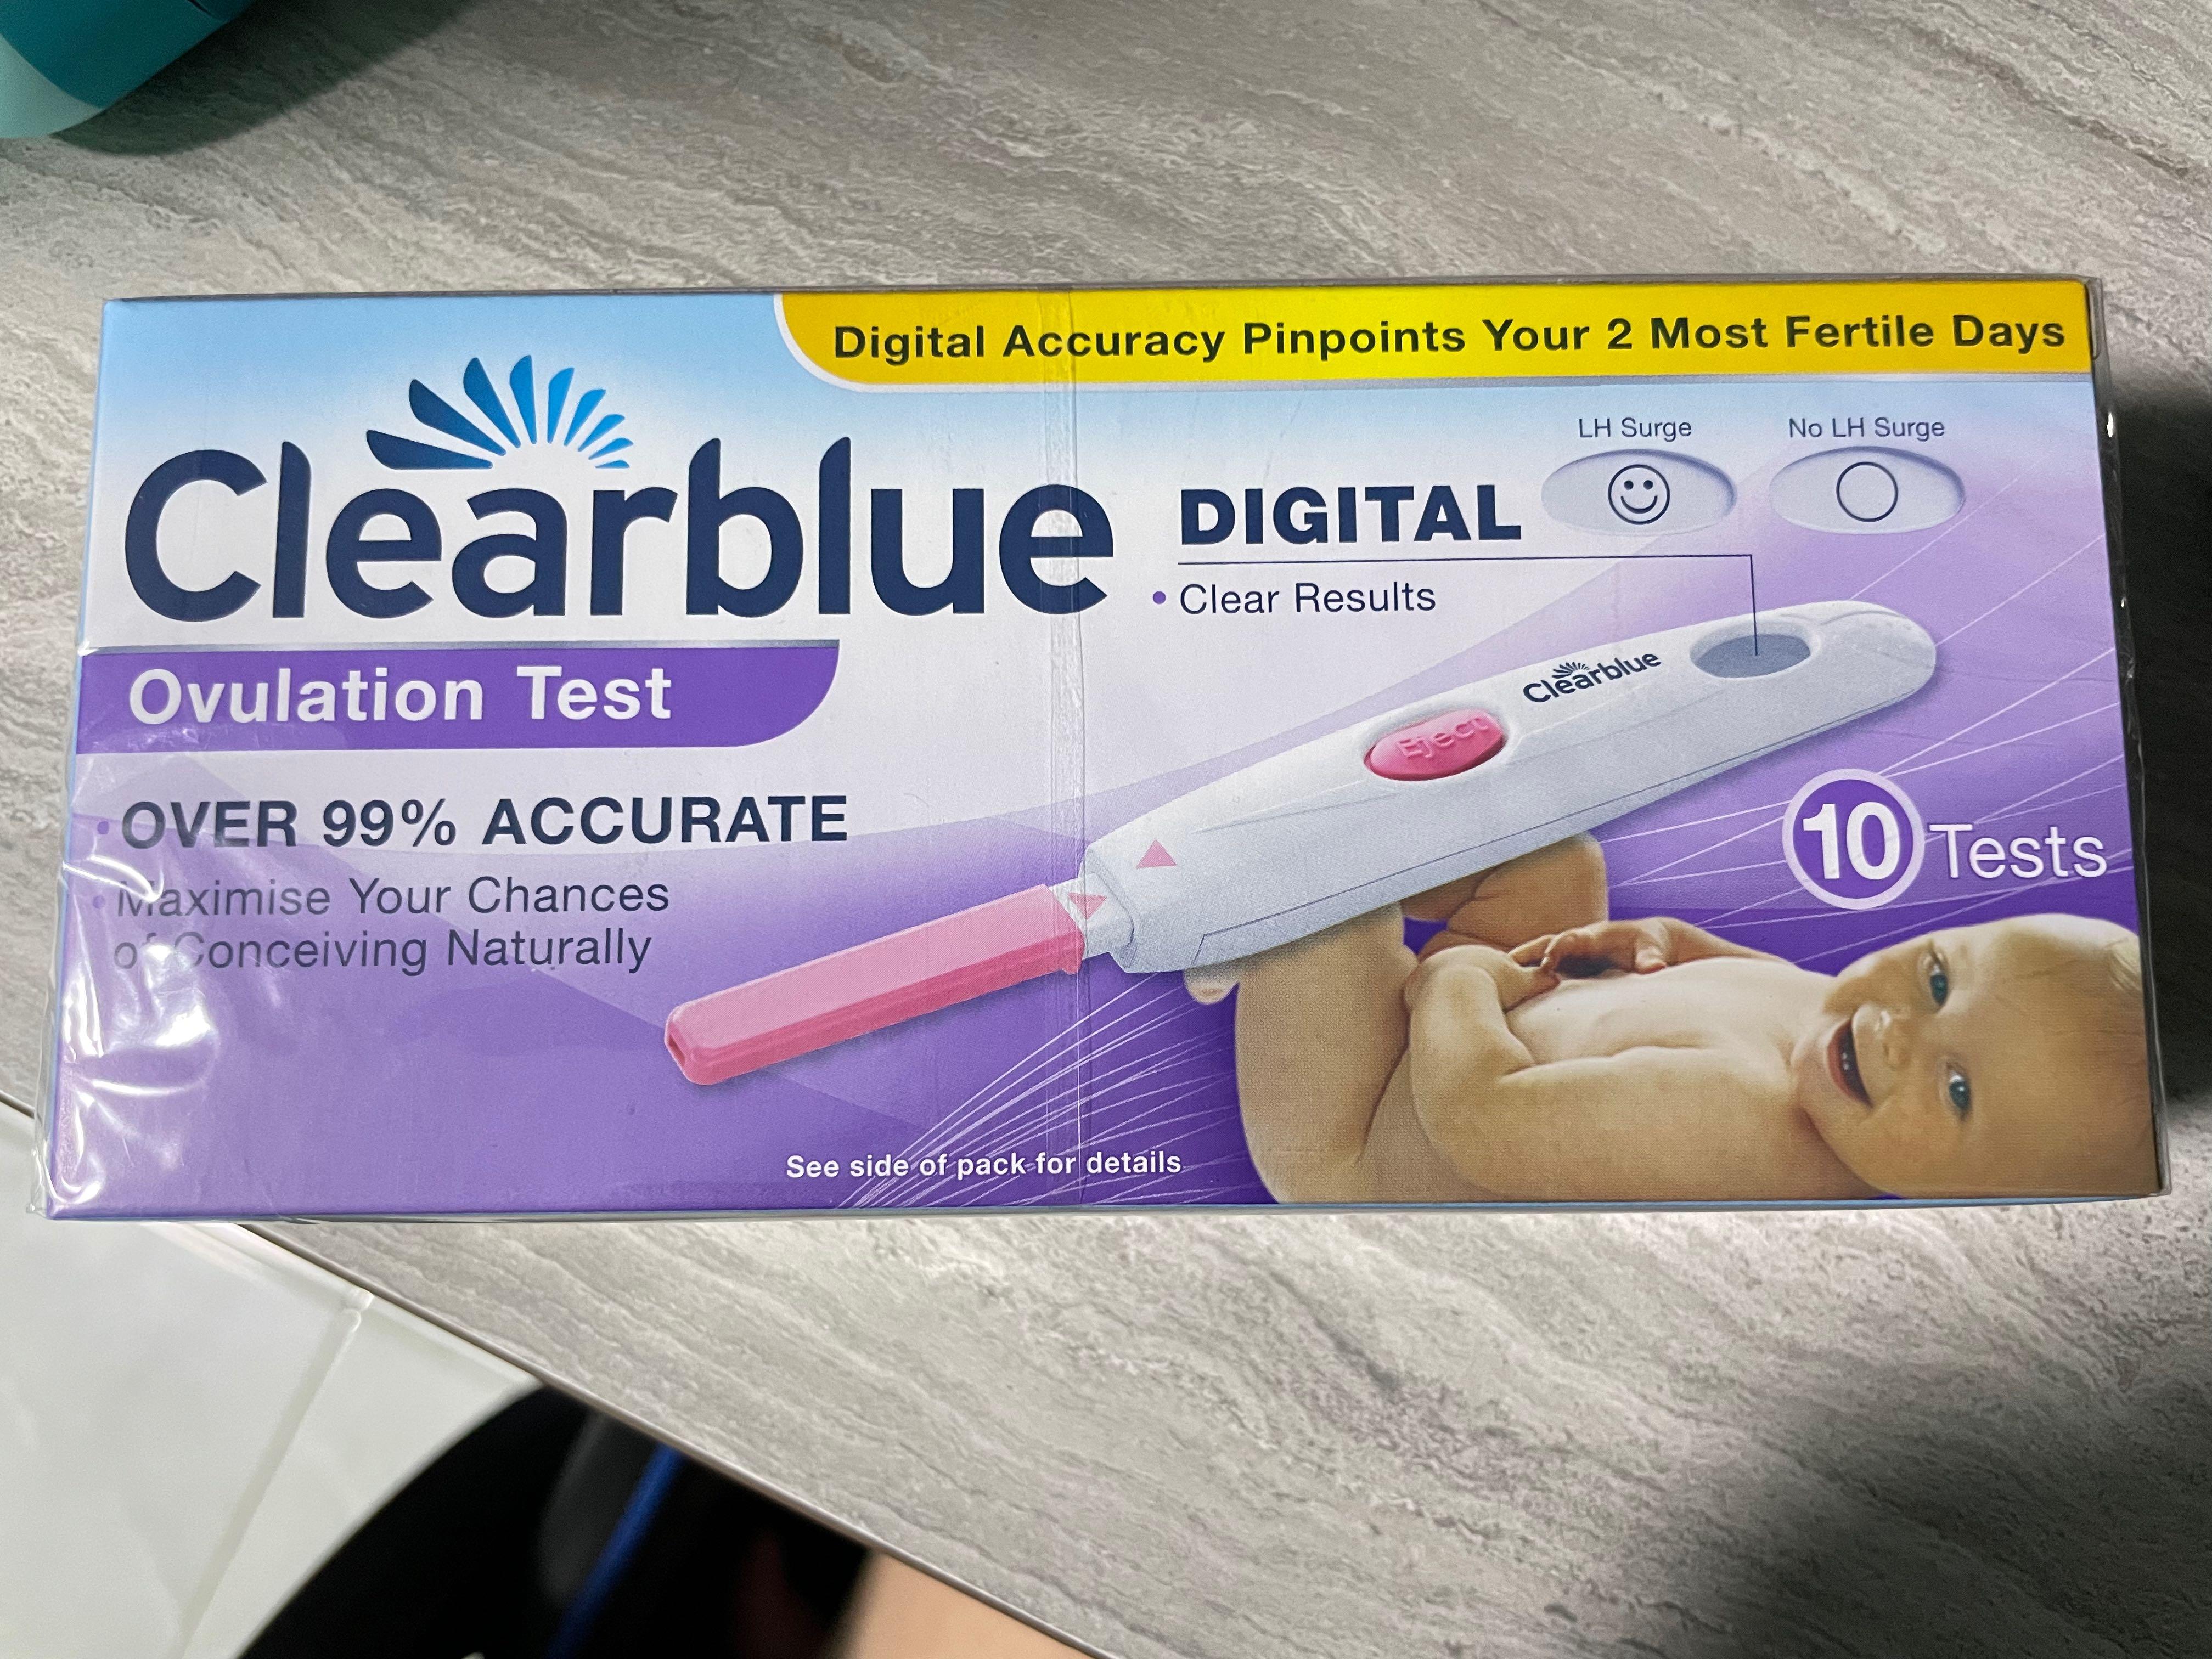 Clearblue Ovulation Kit Health And Nutrition Medical Supplies And Tools On Carousell 9487